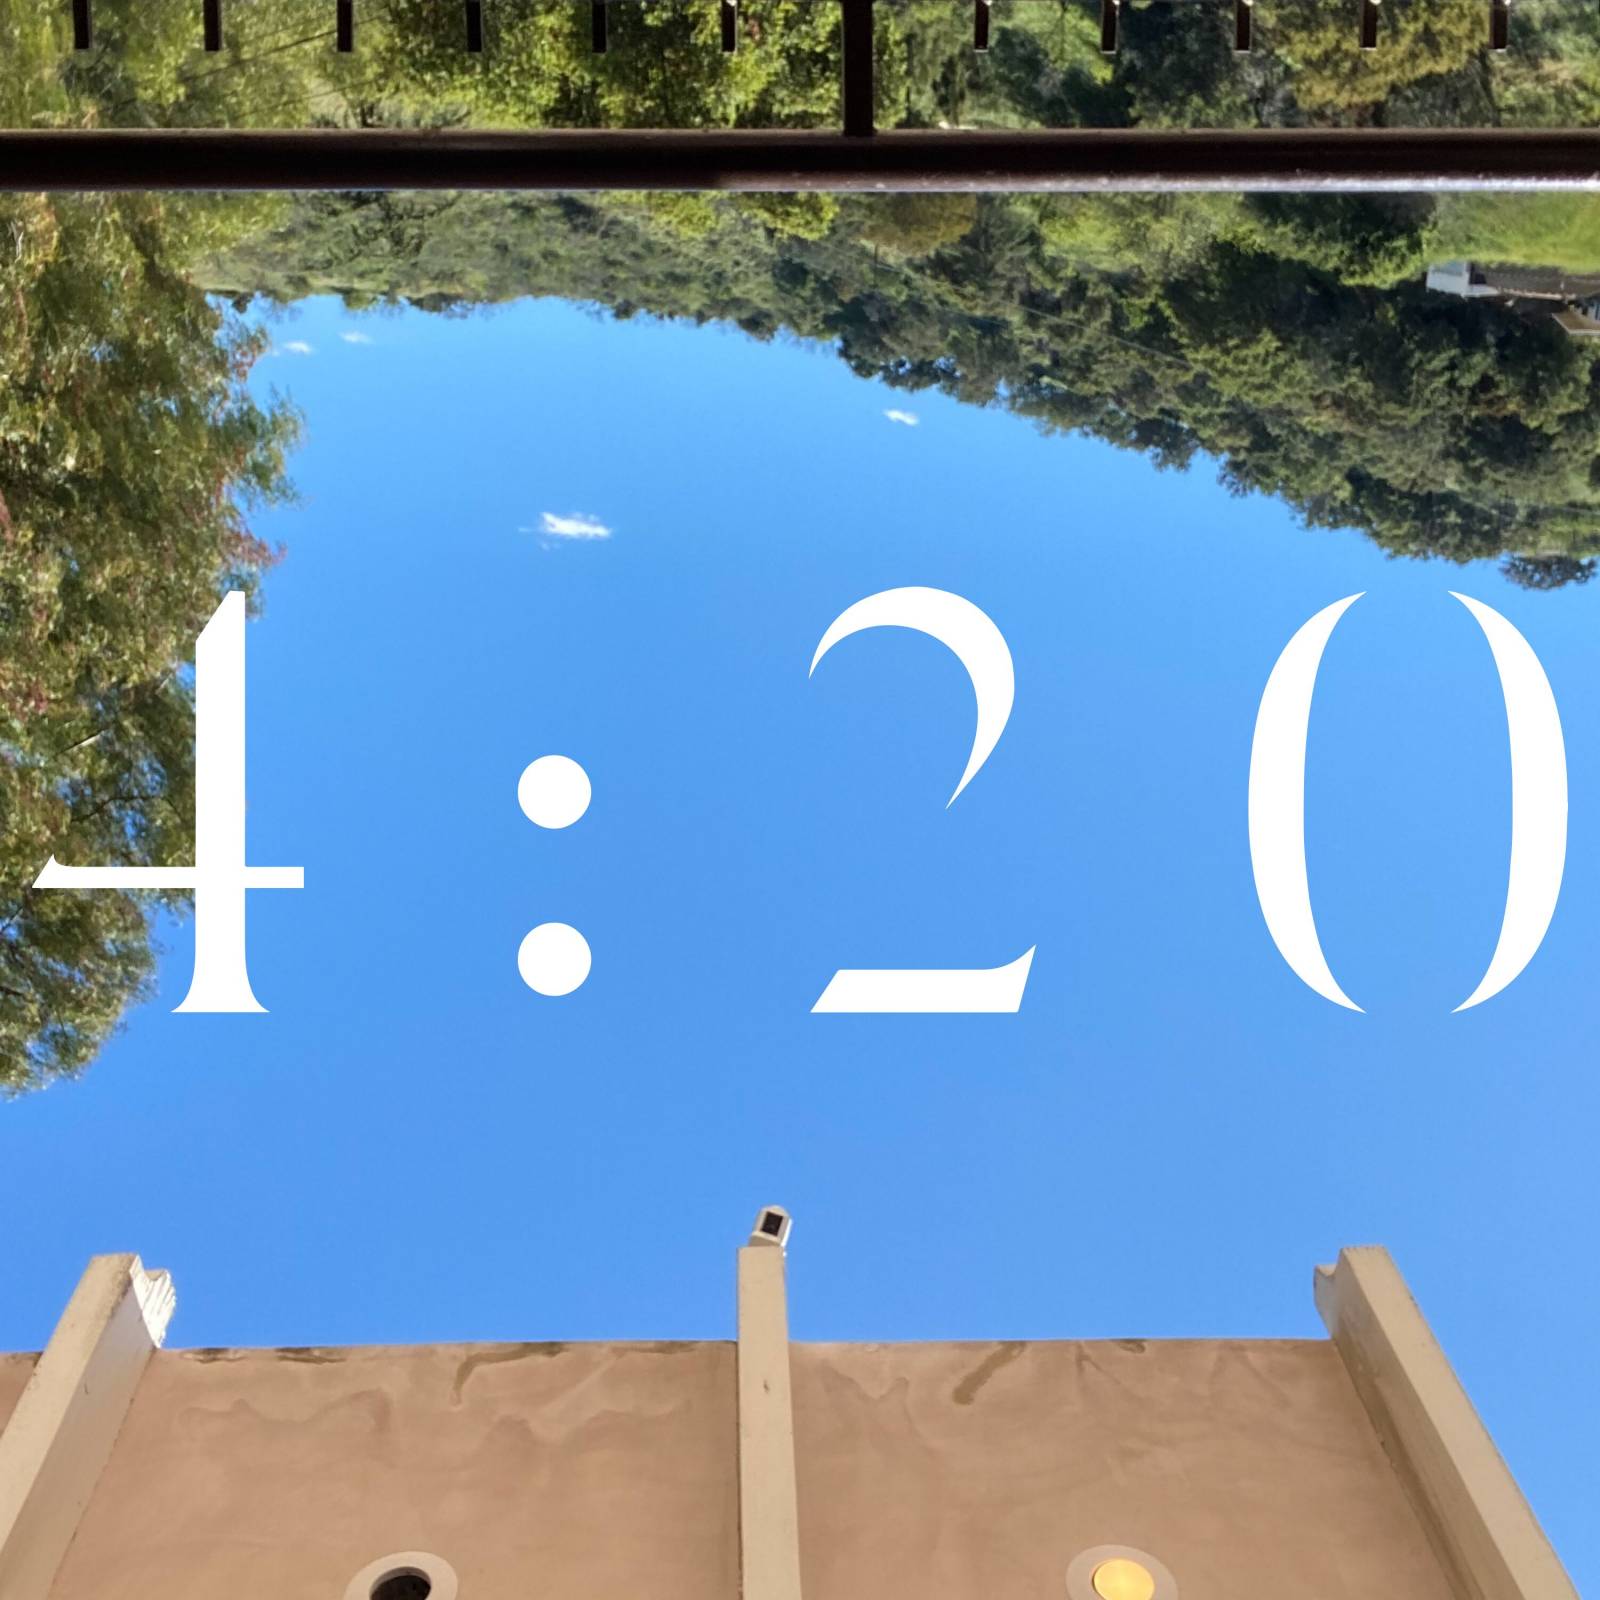 Kanye West Producer Mike Dean Releases '4:20' Mixtape & Compares It To 'Dark Side Of The Moon'